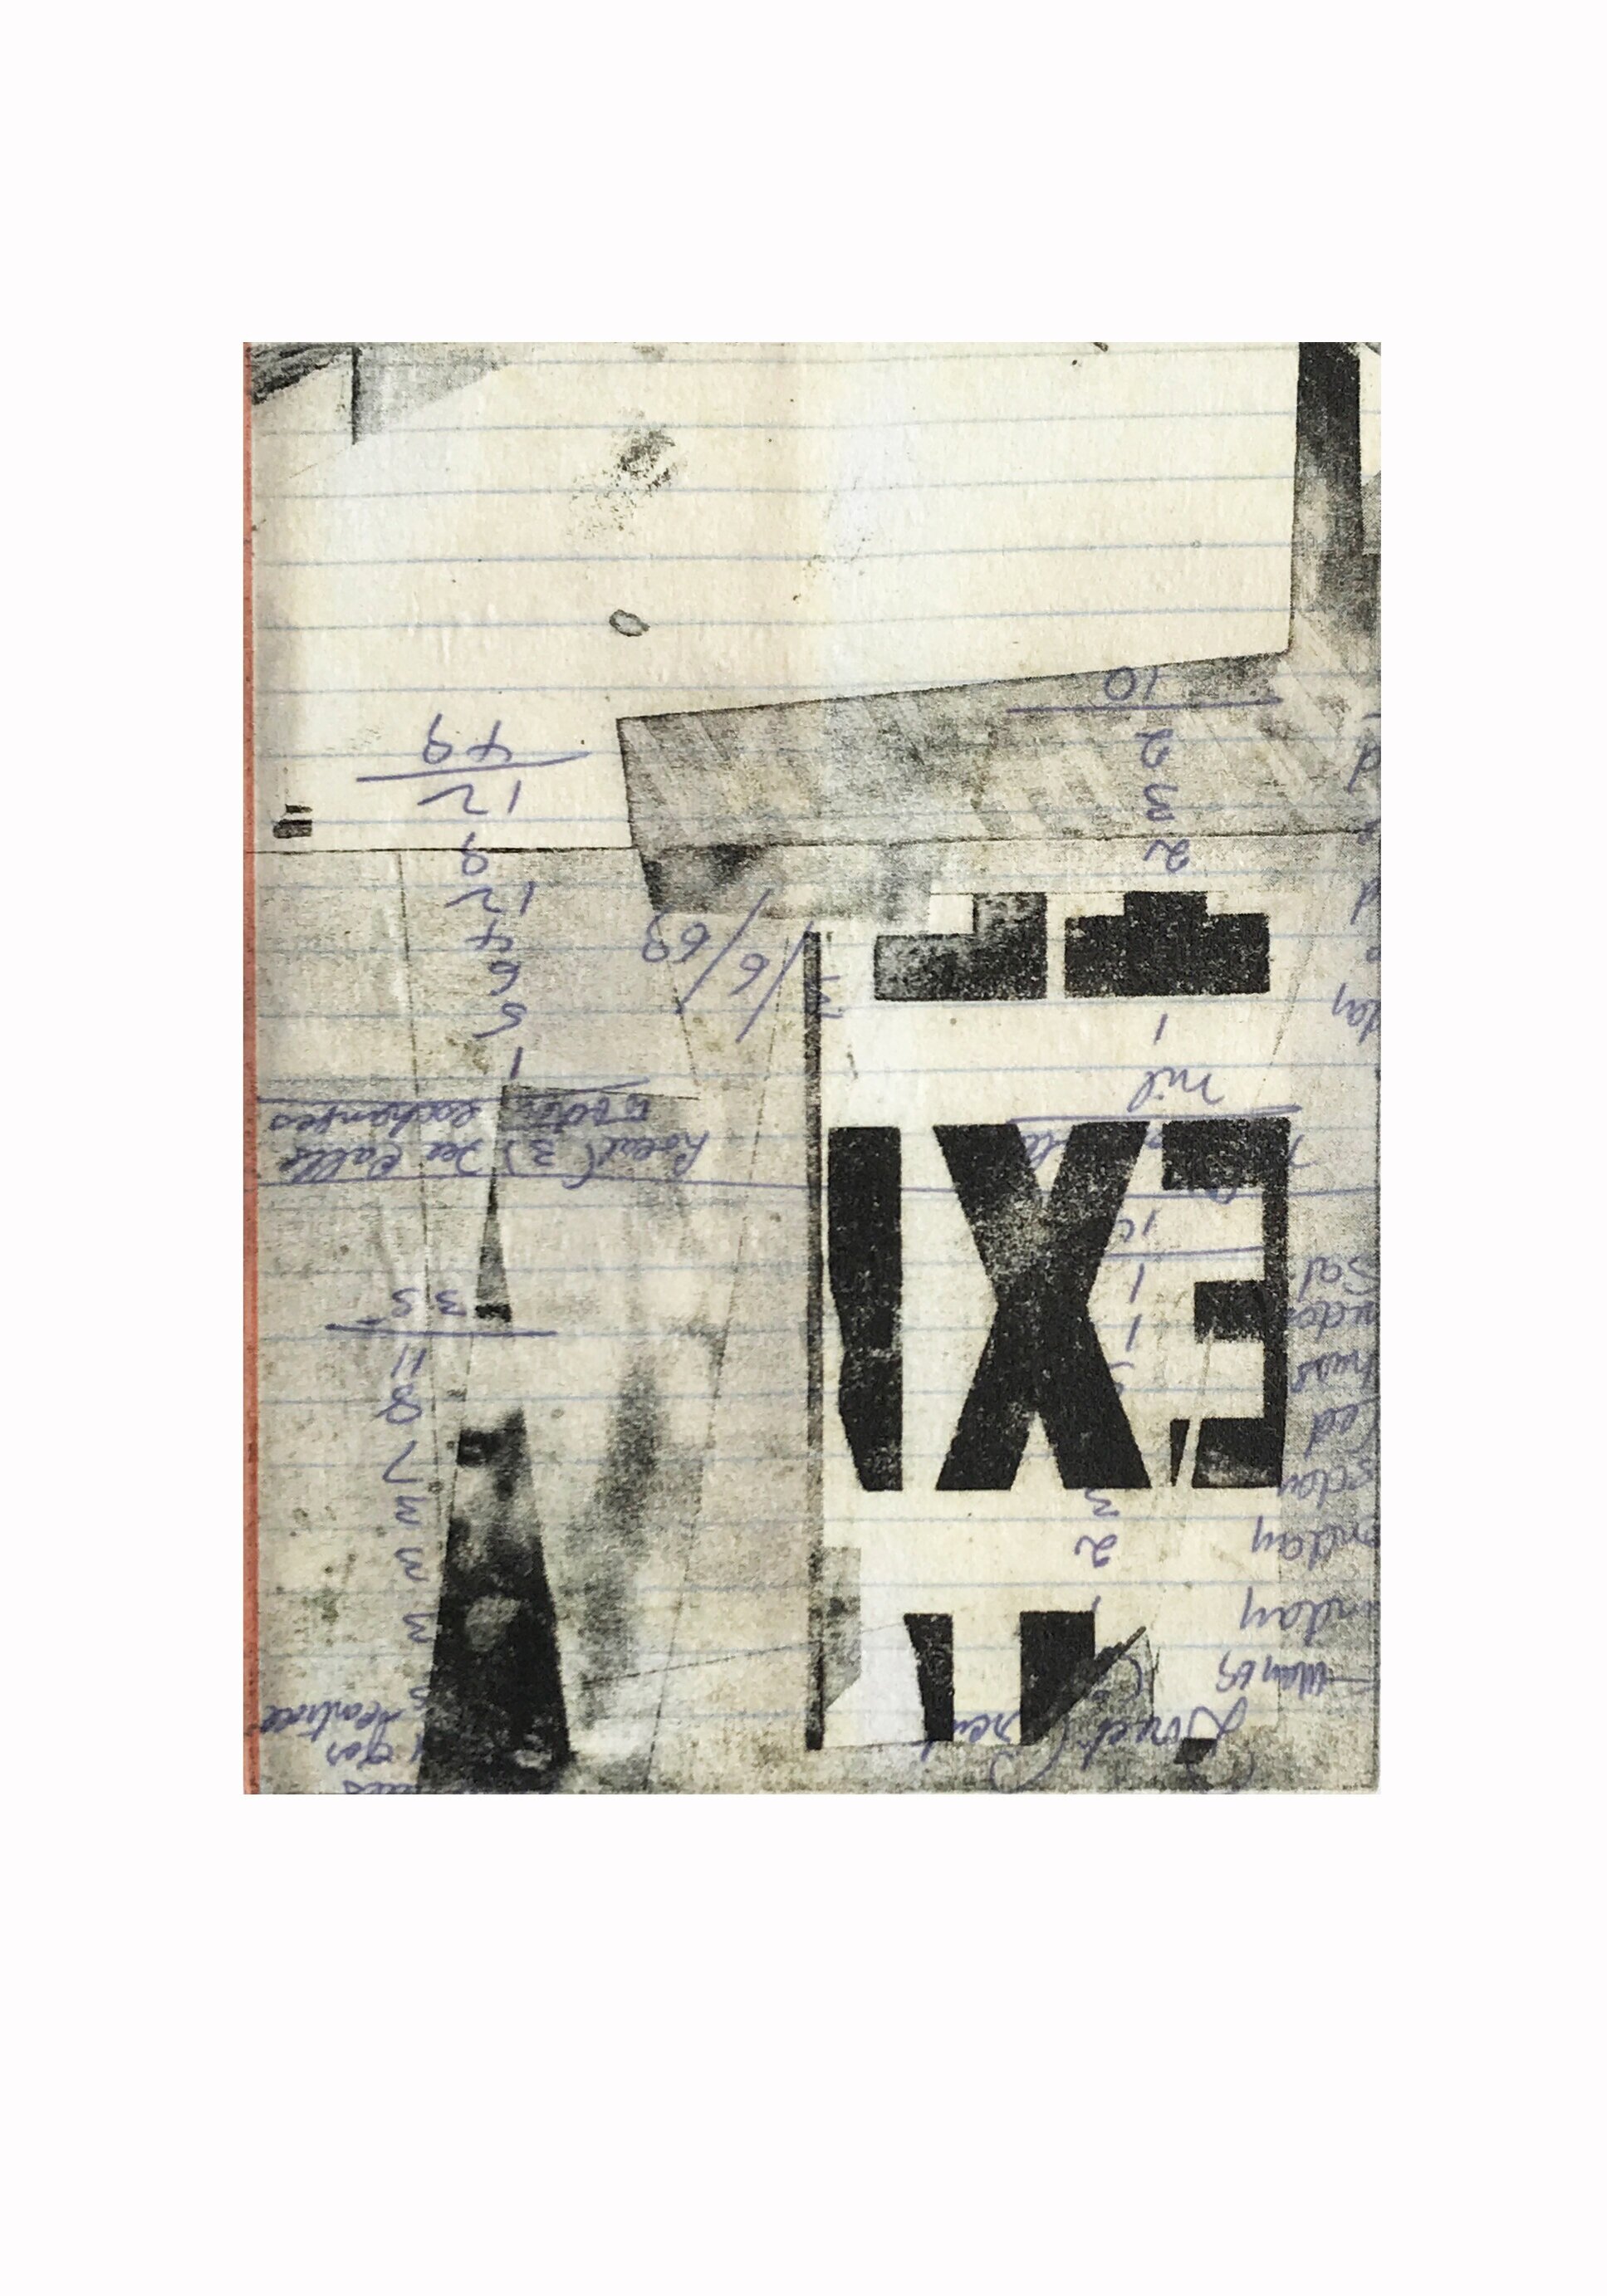   No Exit , photo etching, chine colle, 16cm x 20cm, 2016 